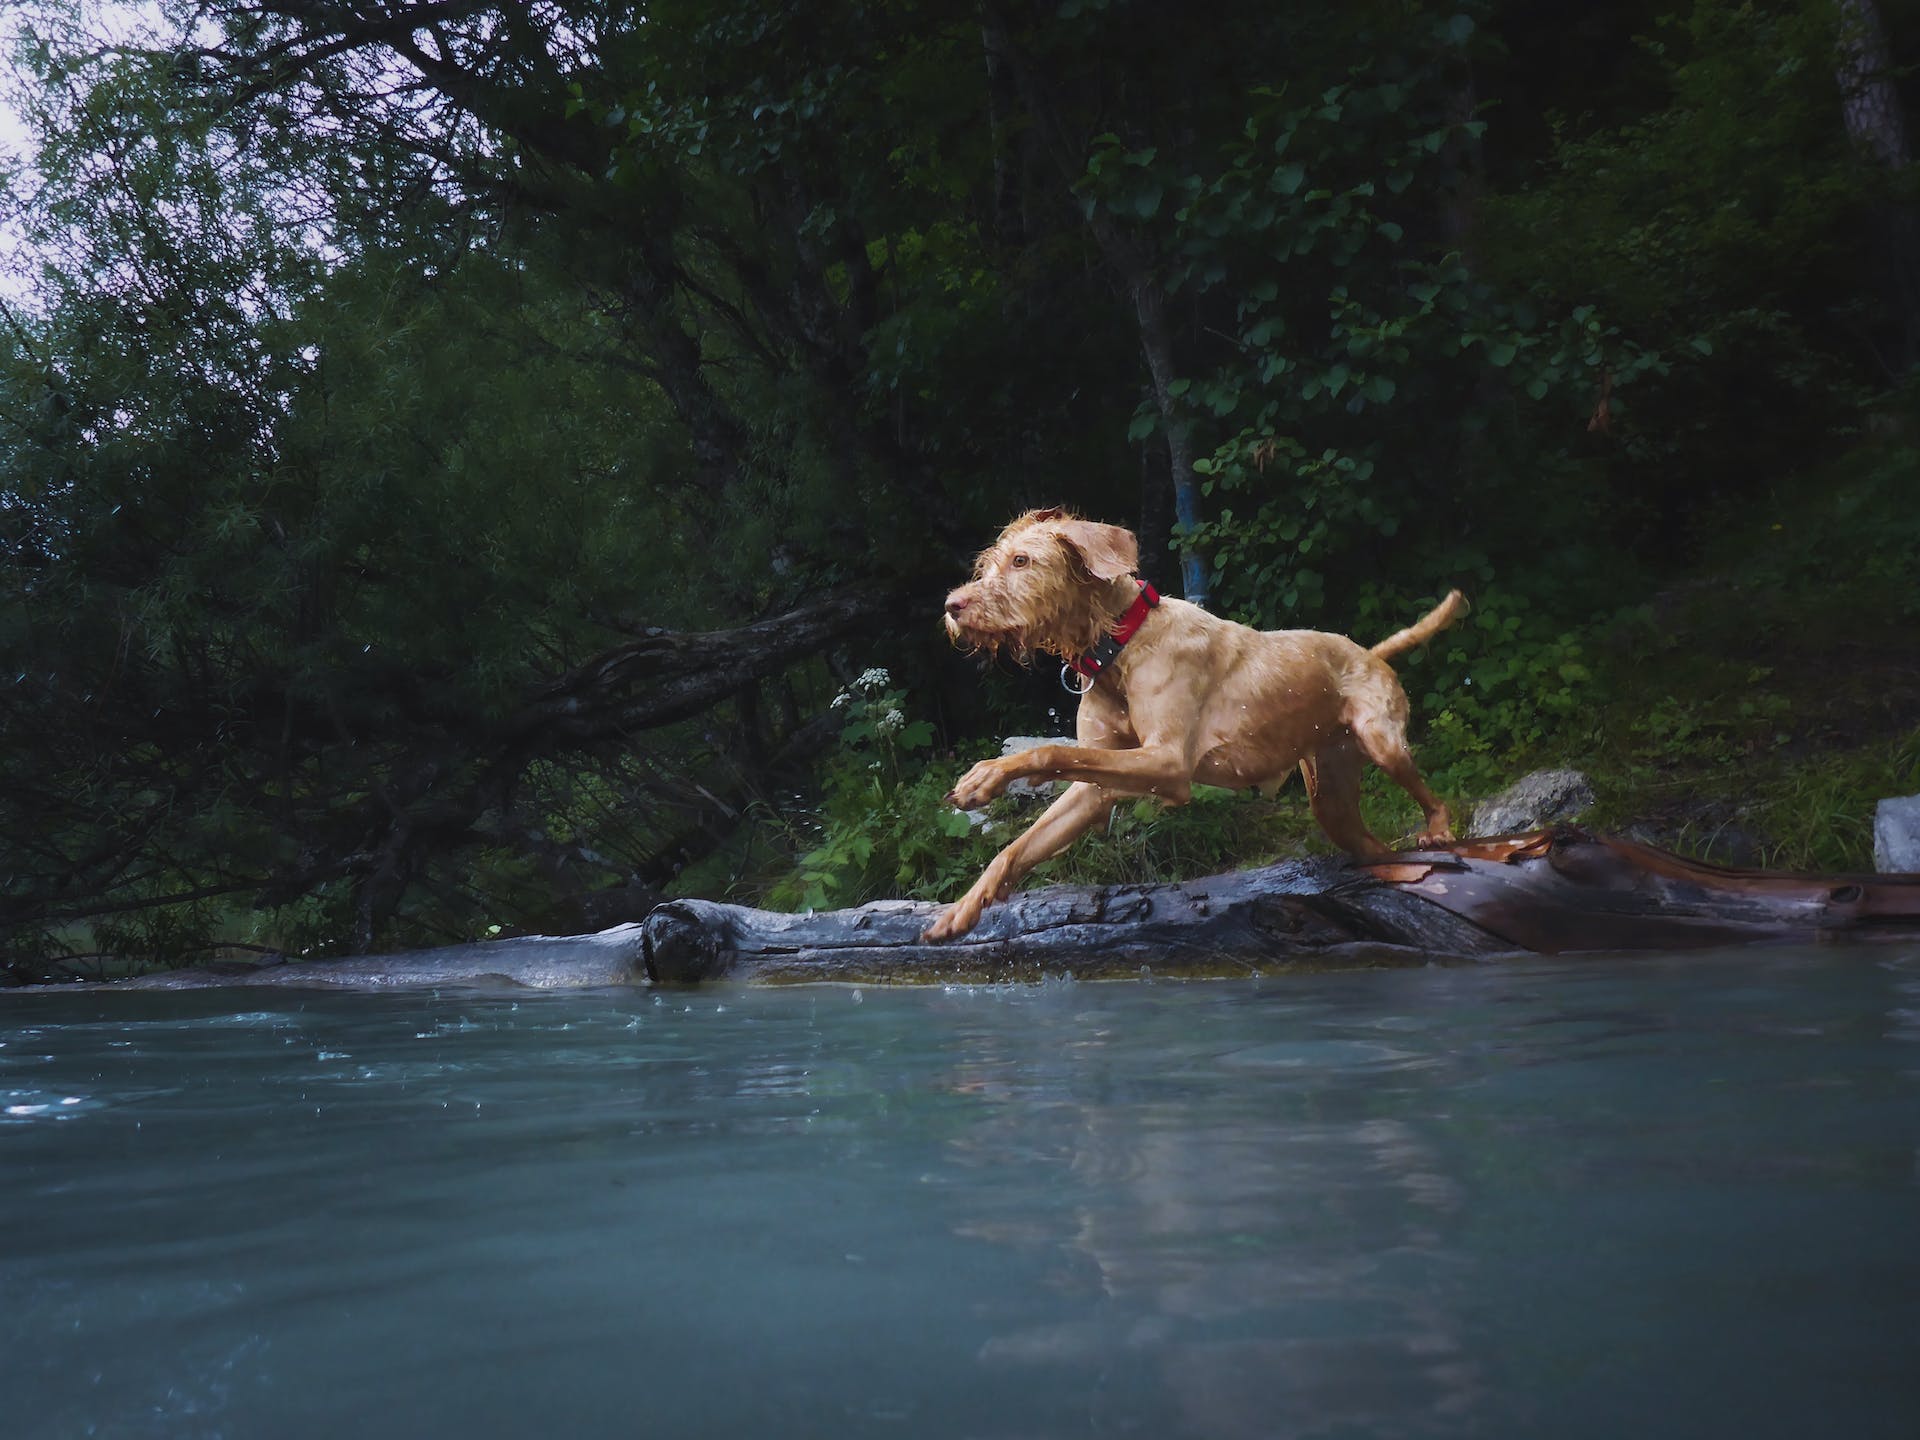 A dog running into an open pool of water in a forest